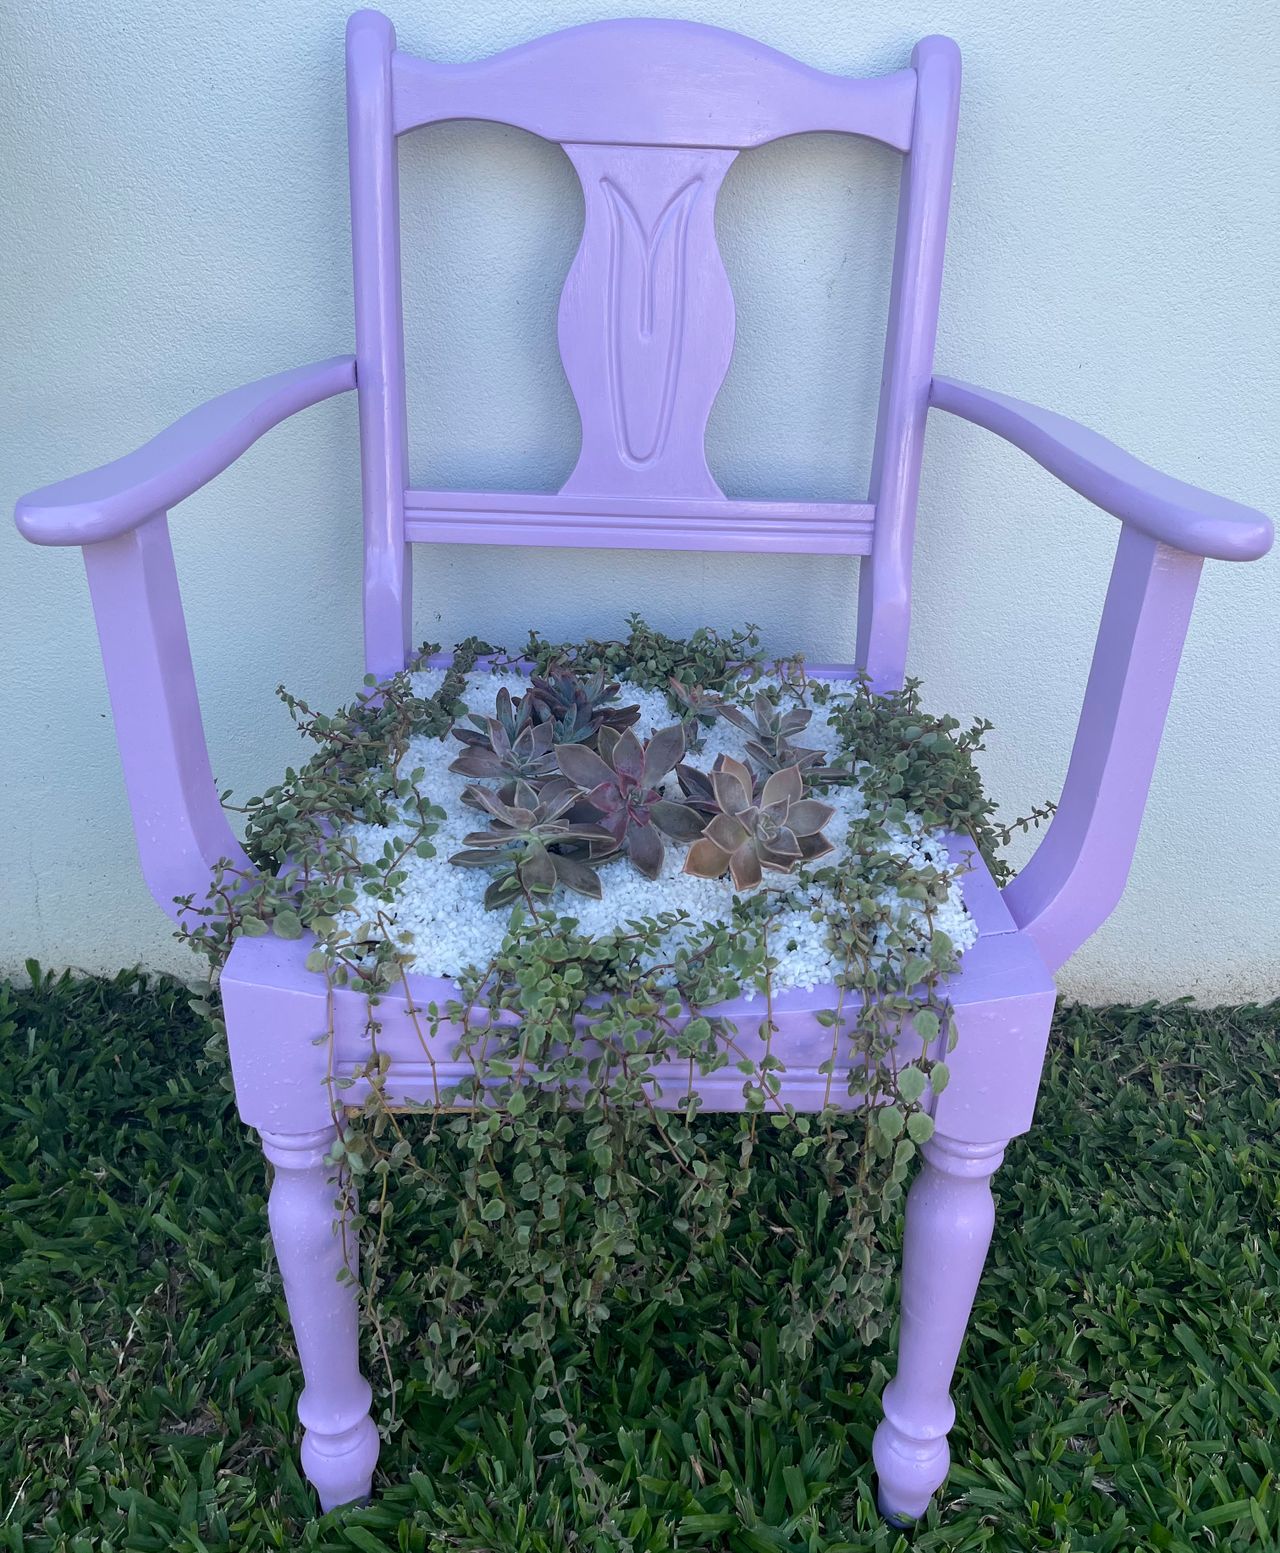 Repurposed garden chair. I used my Ryobi sander to prepare the chair, then used my Ryobi drill to tighten screws before painting. 